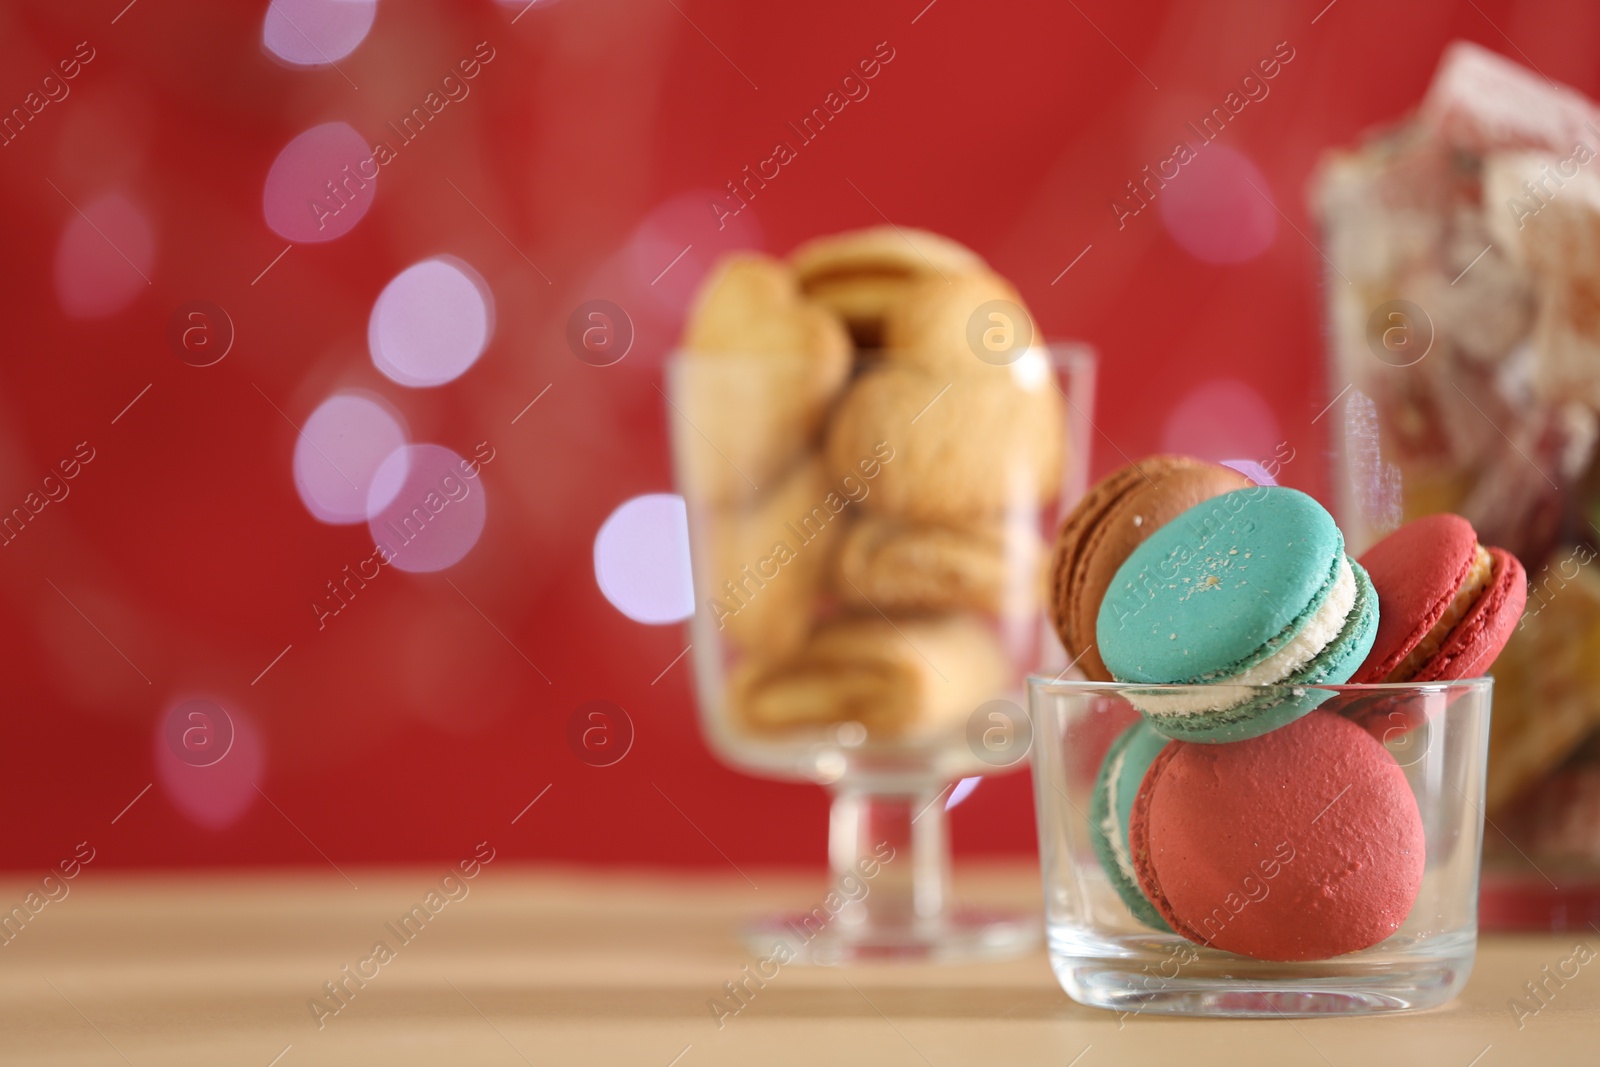 Photo of Delicious macarons in bowl on table against blurred background, closeup. Space for text